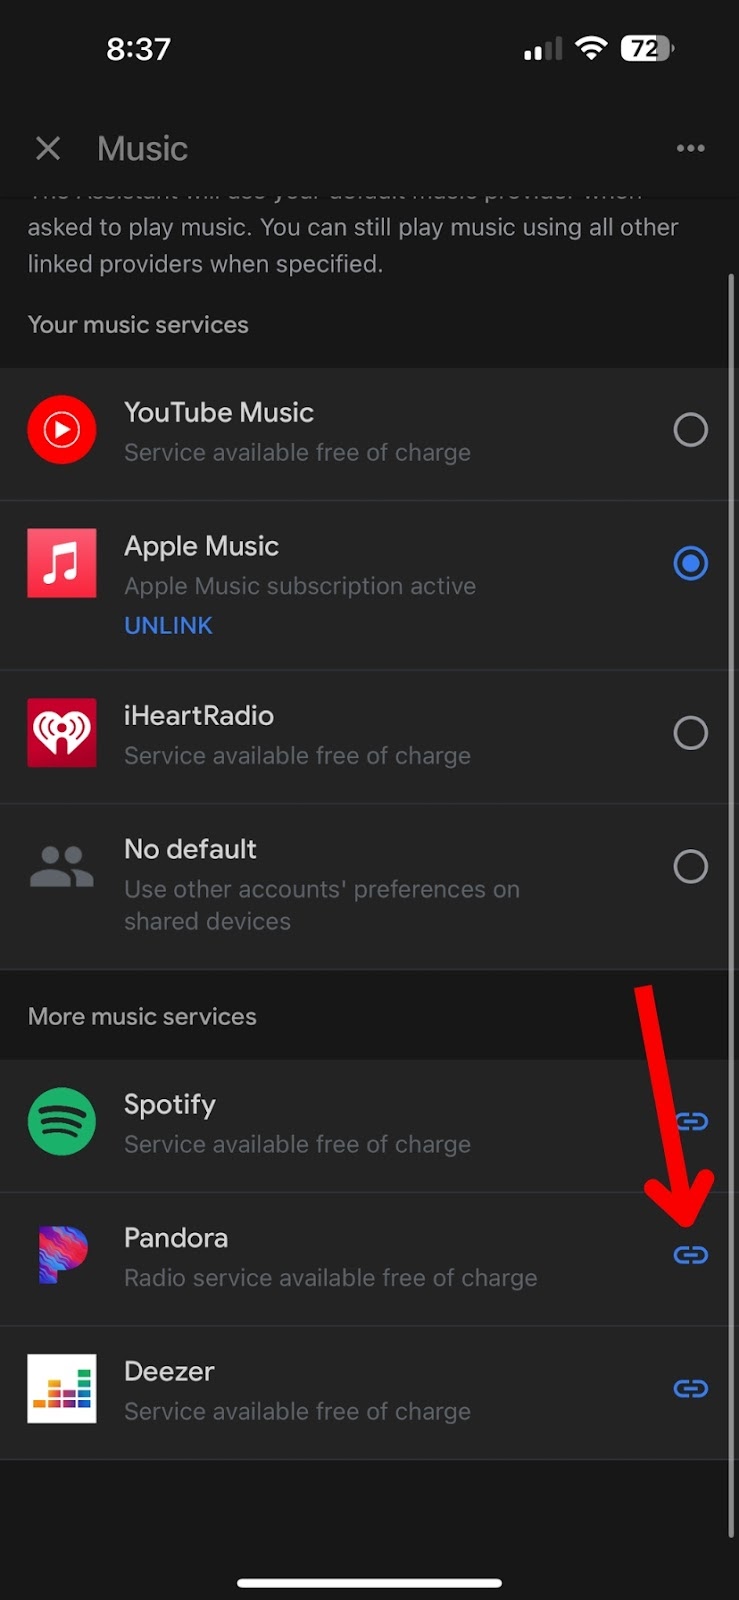 Tap on the Chain icon near the Pandora on Google Home